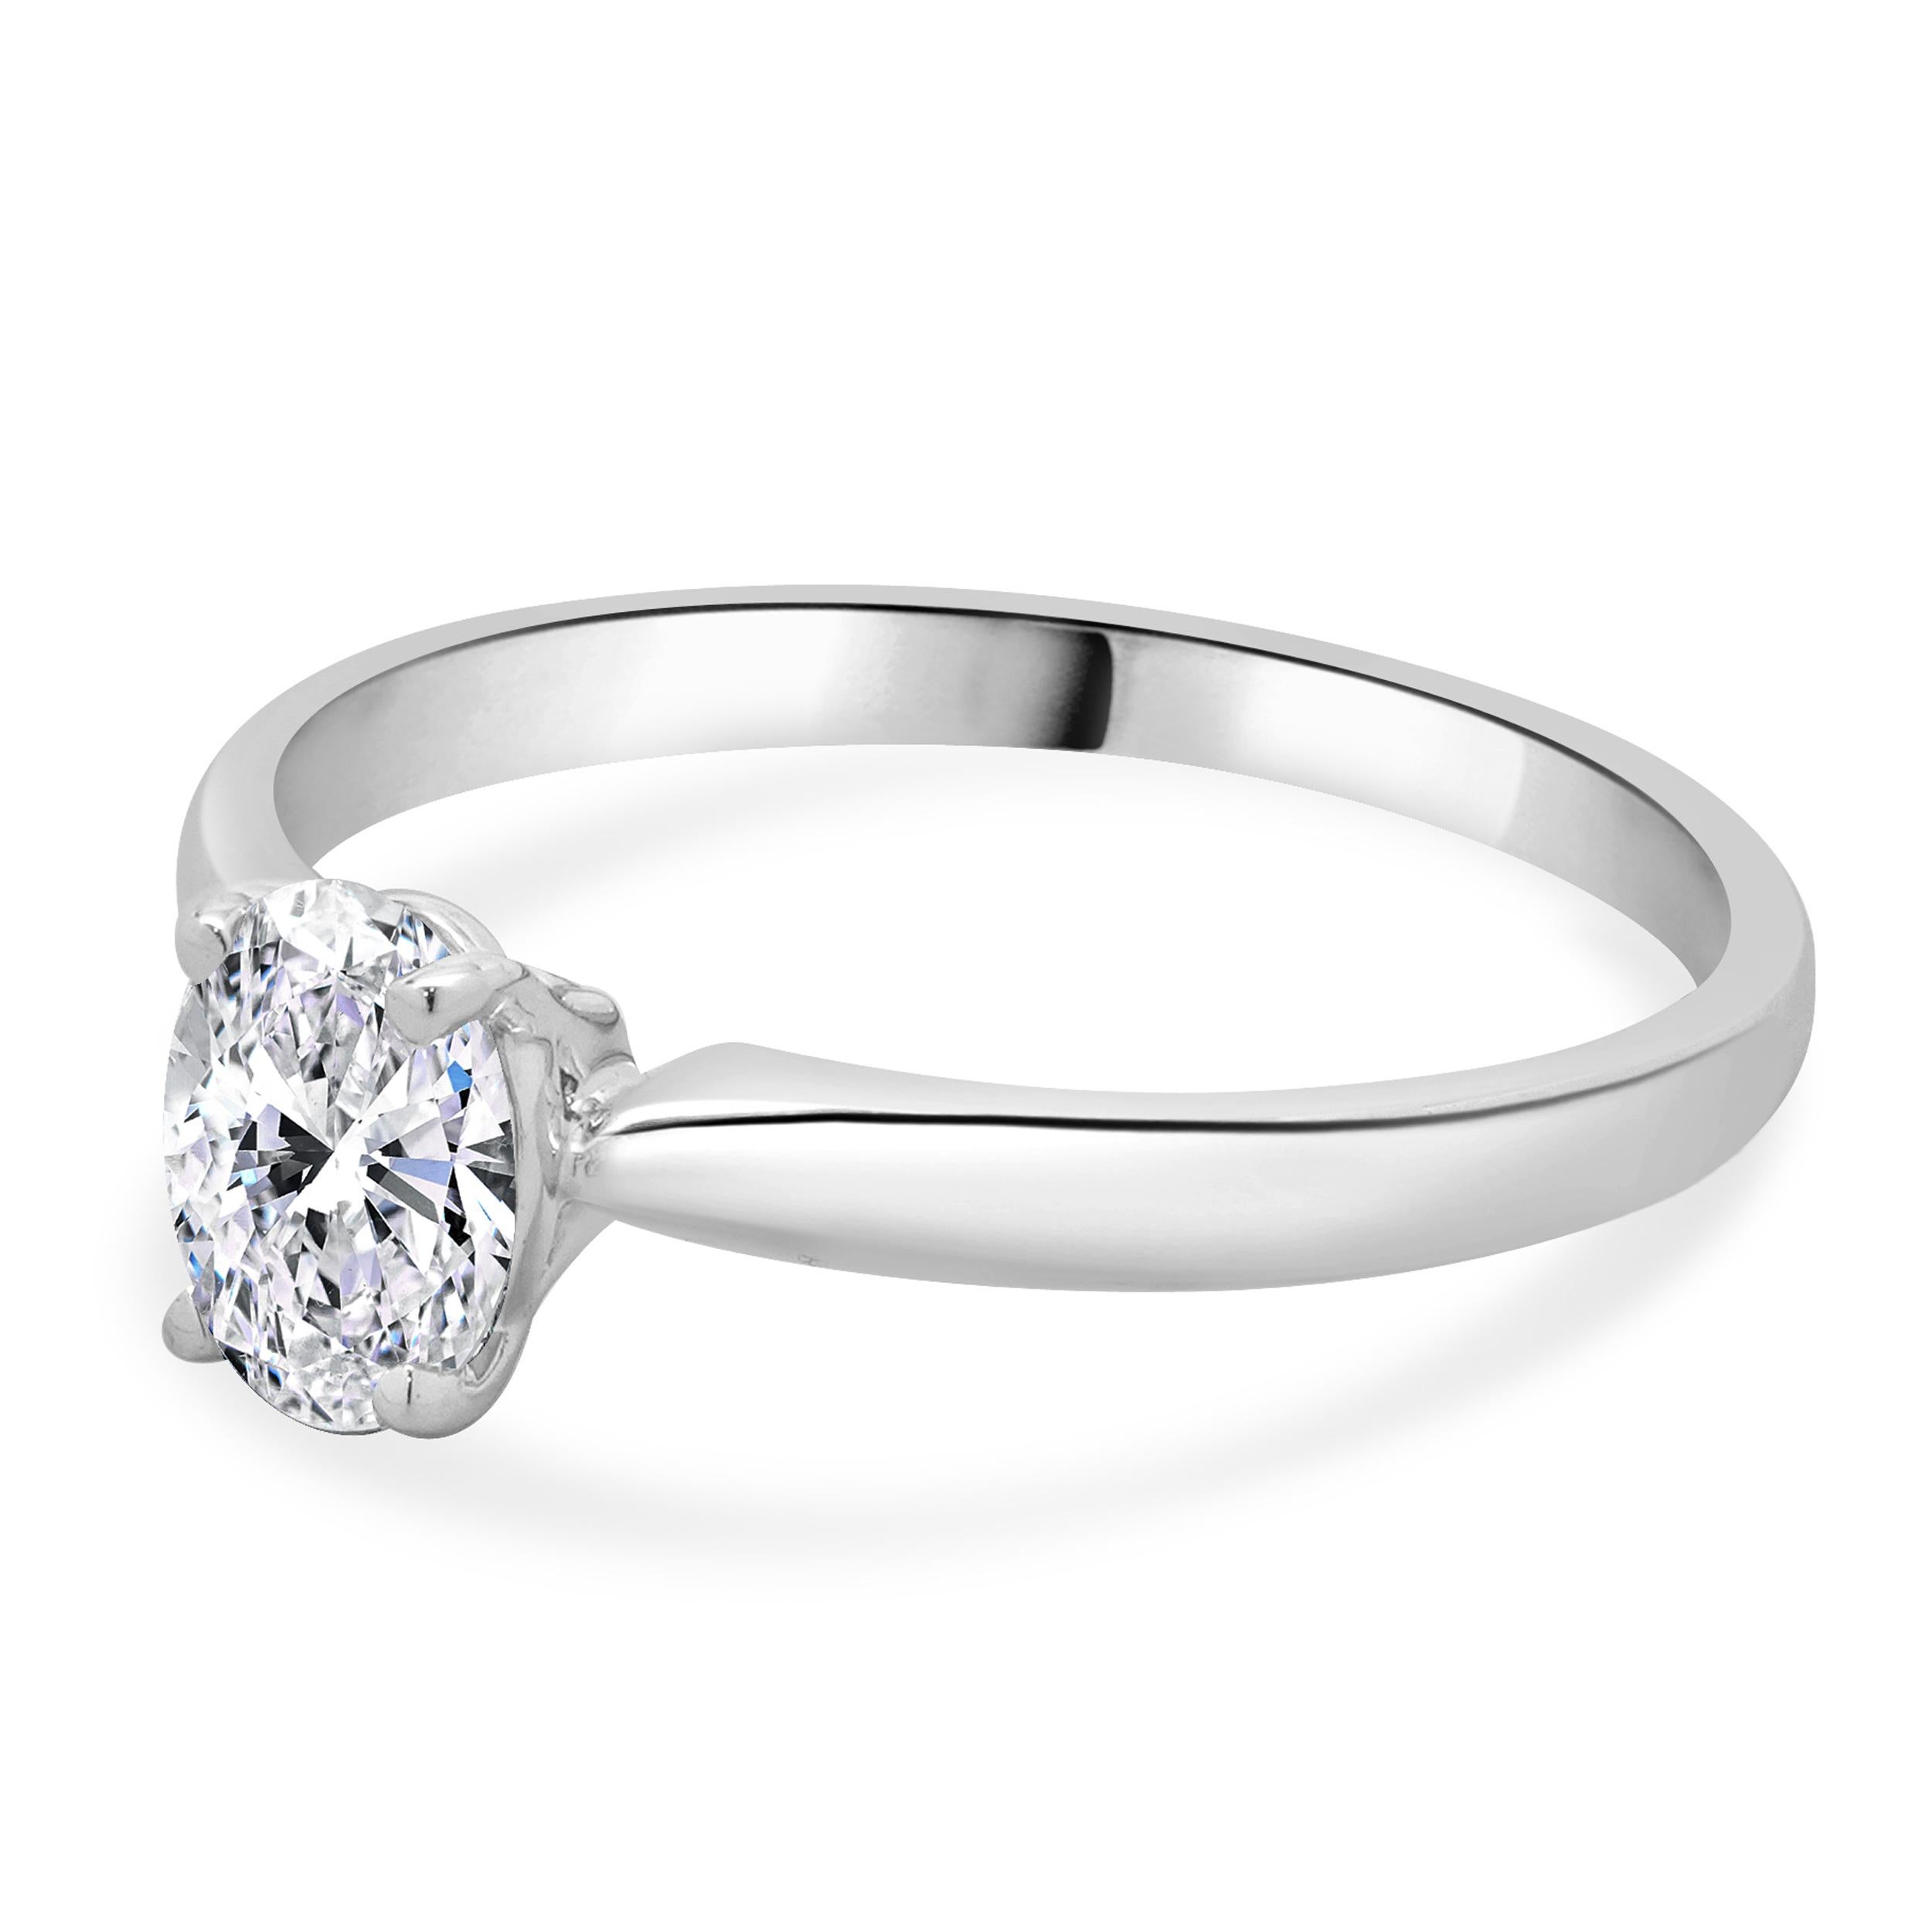 Designer: custom design
Material: 14K white gold
Diamond: 1 oval cut = 0.70ct
Color: F
Clarity: I1
Dimensions: ring top measures 2.3mm
Size: 7 complimentary sizing available 
Weight: 2.26 grams
